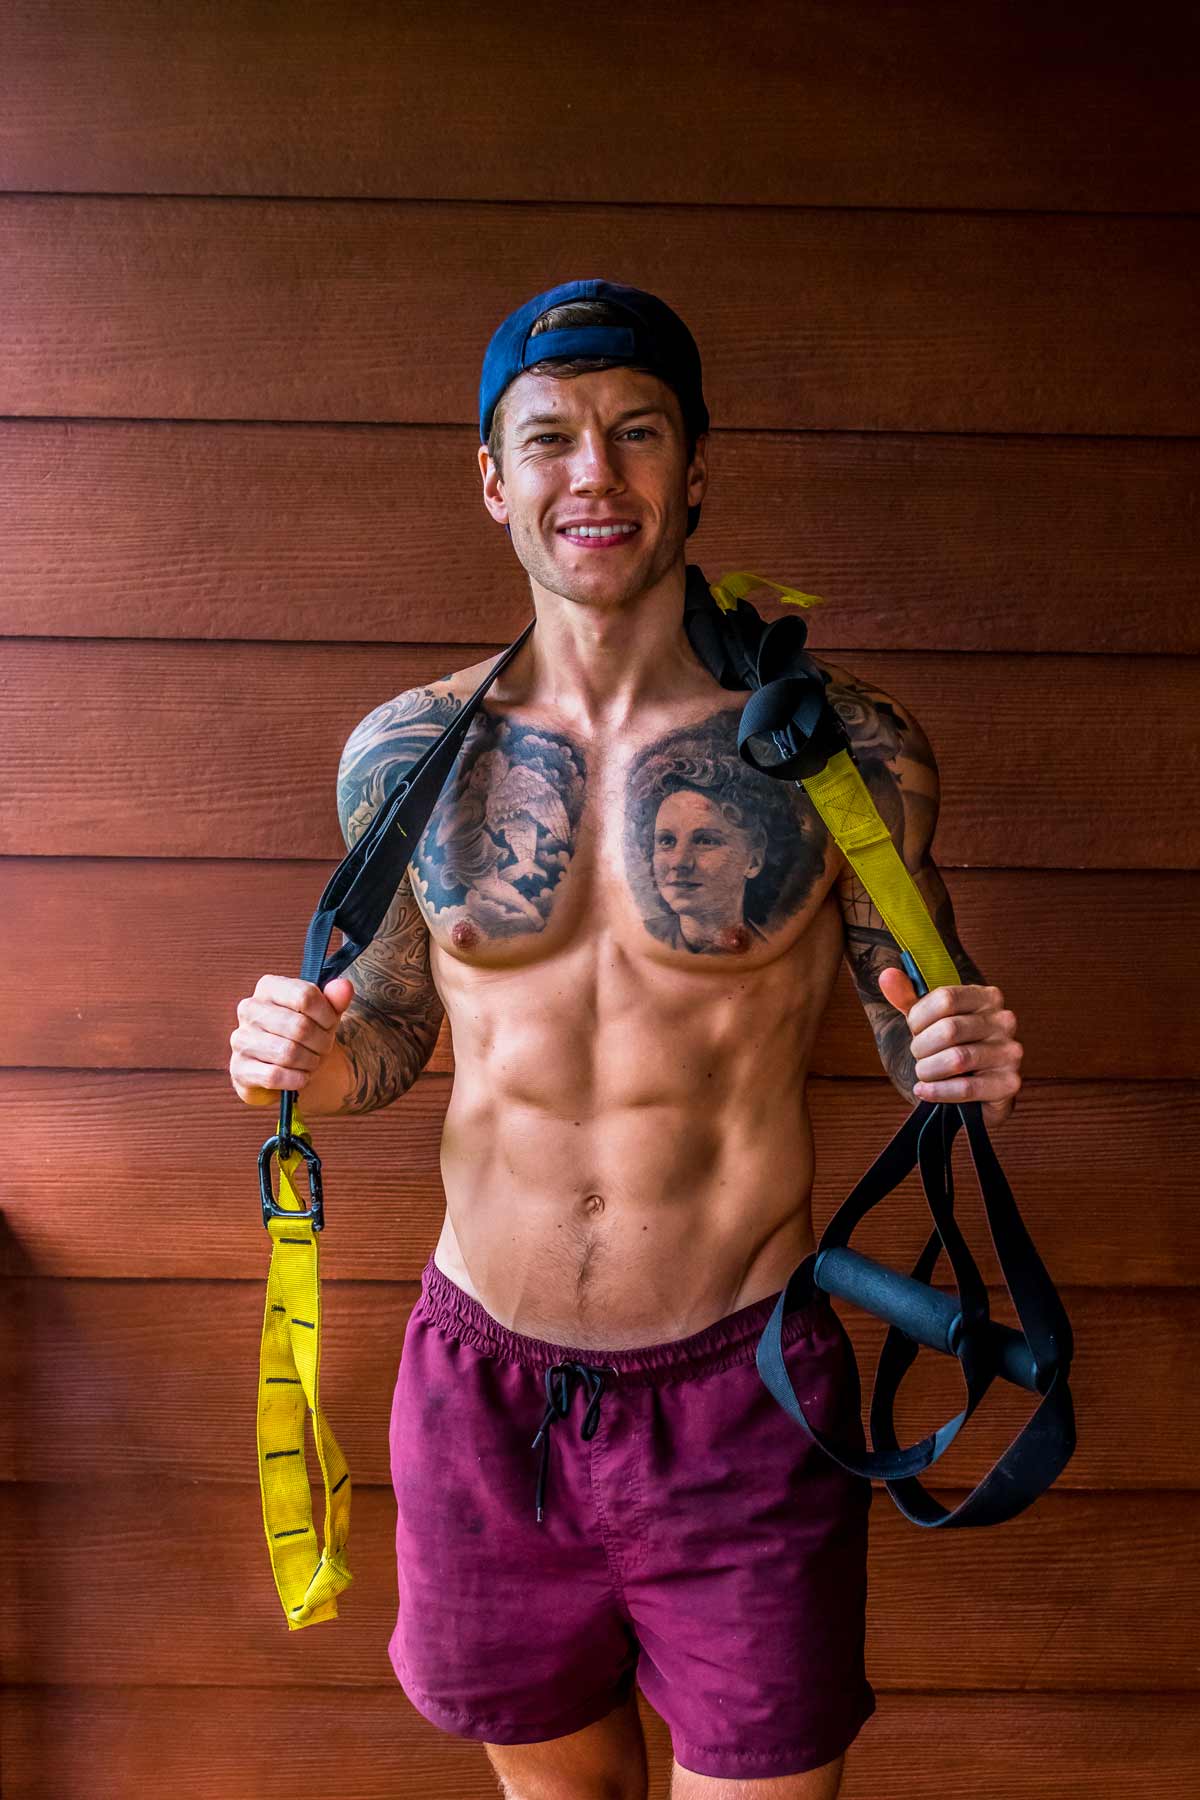 The 16 best TRX exercises guide with video technique